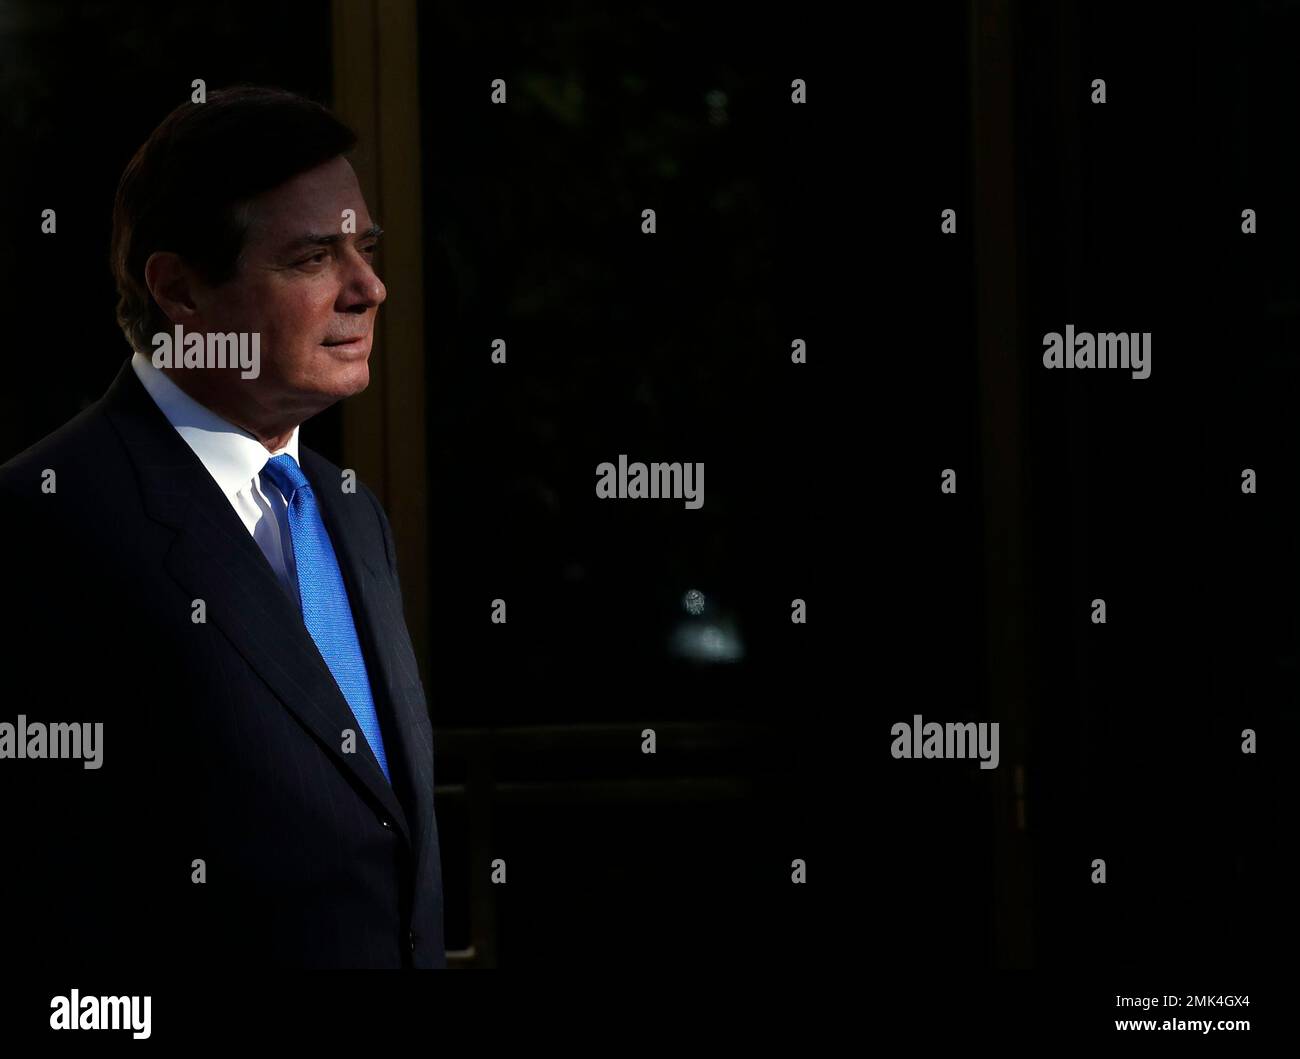 FILE - In this Oct. 30, 2017, file photo, Paul Manafort leaves Federal District Court in Washington. Manafort, President Donald Trump's former campaign chairman, and Manafort's business associate Rick Gates pleaded not guilty to felony charges of conspiracy against the United States and other counts. (AP Photo/Alex Brandon, File) Banque D'Images